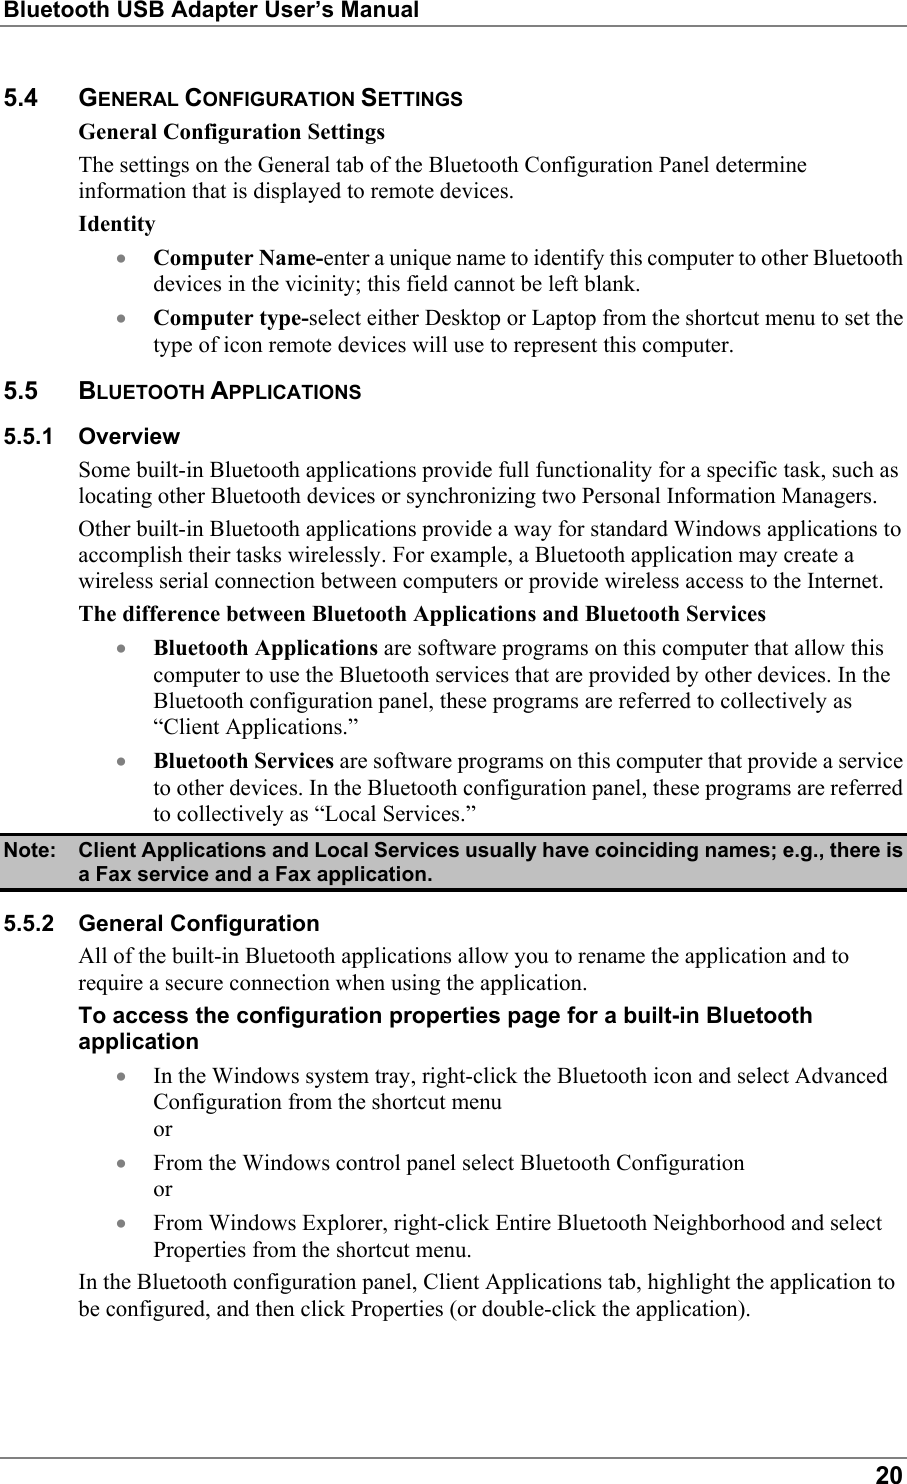 Bluetooth USB Adapter User’s Manual205.4 GENERAL CONFIGURATION SETTINGSGeneral Configuration SettingsThe settings on the General tab of the Bluetooth Configuration Panel determineinformation that is displayed to remote devices.Identity• Computer Name-enter a unique name to identify this computer to other Bluetoothdevices in the vicinity; this field cannot be left blank.• Computer type-select either Desktop or Laptop from the shortcut menu to set thetype of icon remote devices will use to represent this computer.5.5 BLUETOOTH APPLICATIONS5.5.1 OverviewSome built-in Bluetooth applications provide full functionality for a specific task, such aslocating other Bluetooth devices or synchronizing two Personal Information Managers.Other built-in Bluetooth applications provide a way for standard Windows applications toaccomplish their tasks wirelessly. For example, a Bluetooth application may create awireless serial connection between computers or provide wireless access to the Internet.The difference between Bluetooth Applications and Bluetooth Services• Bluetooth Applications are software programs on this computer that allow thiscomputer to use the Bluetooth services that are provided by other devices. In theBluetooth configuration panel, these programs are referred to collectively as“Client Applications.”• Bluetooth Services are software programs on this computer that provide a serviceto other devices. In the Bluetooth configuration panel, these programs are referredto collectively as “Local Services.”Note: Client Applications and Local Services usually have coinciding names; e.g., there isa Fax service and a Fax application.5.5.2 General ConfigurationAll of the built-in Bluetooth applications allow you to rename the application and torequire a secure connection when using the application.To access the configuration properties page for a built-in Bluetoothapplication• In the Windows system tray, right-click the Bluetooth icon and select AdvancedConfiguration from the shortcut menuor• From the Windows control panel select Bluetooth Configurationor• From Windows Explorer, right-click Entire Bluetooth Neighborhood and selectProperties from the shortcut menu.In the Bluetooth configuration panel, Client Applications tab, highlight the application tobe configured, and then click Properties (or double-click the application).